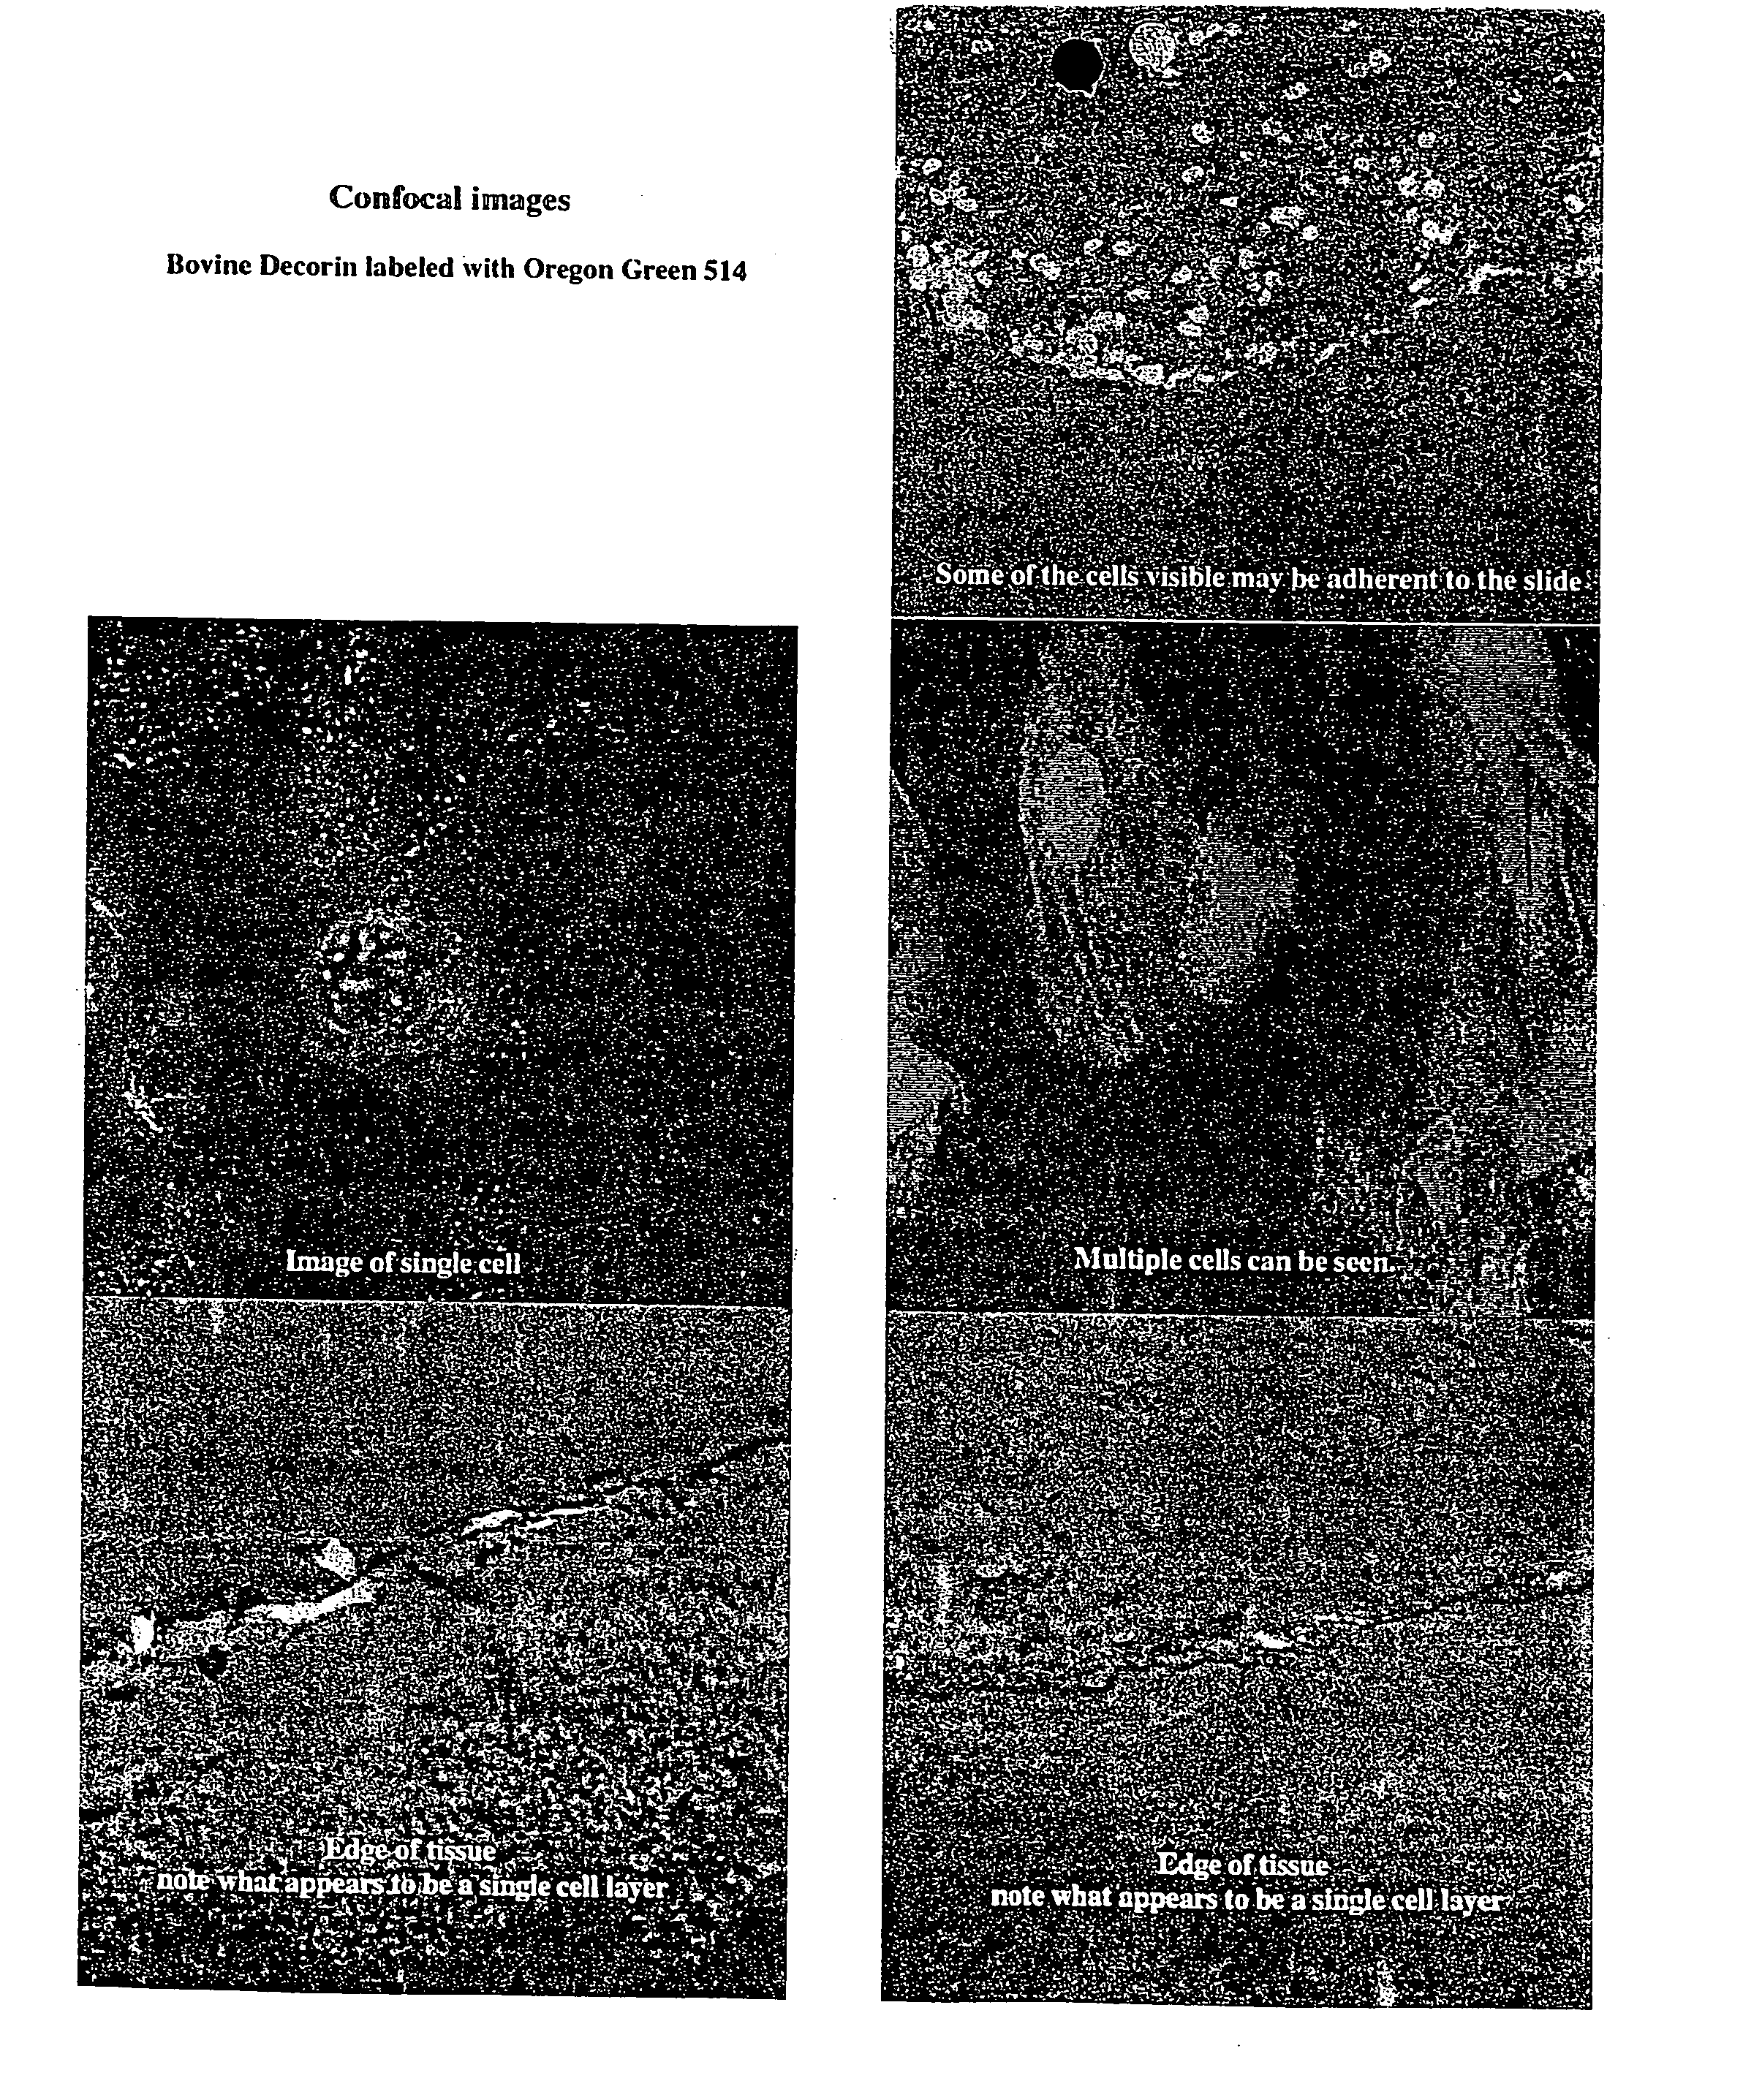 Composition for stabilizing corneal tissue during or after orthokeratology lens wear